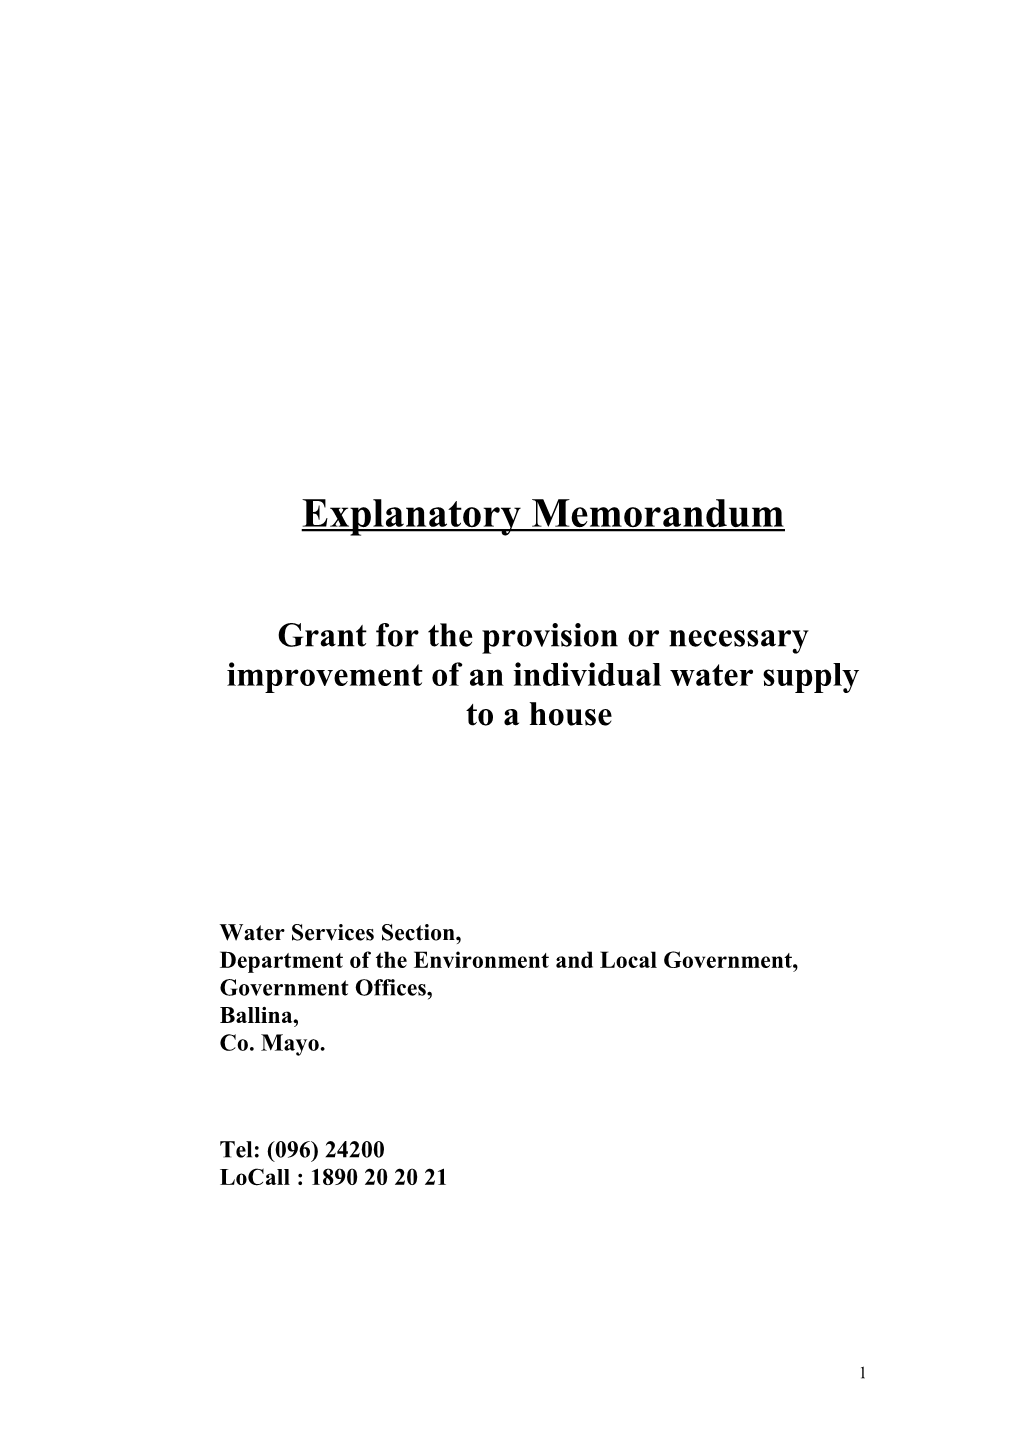 Grant for the Provision Or Necessary Improvement of an Individual Water Supply to a House